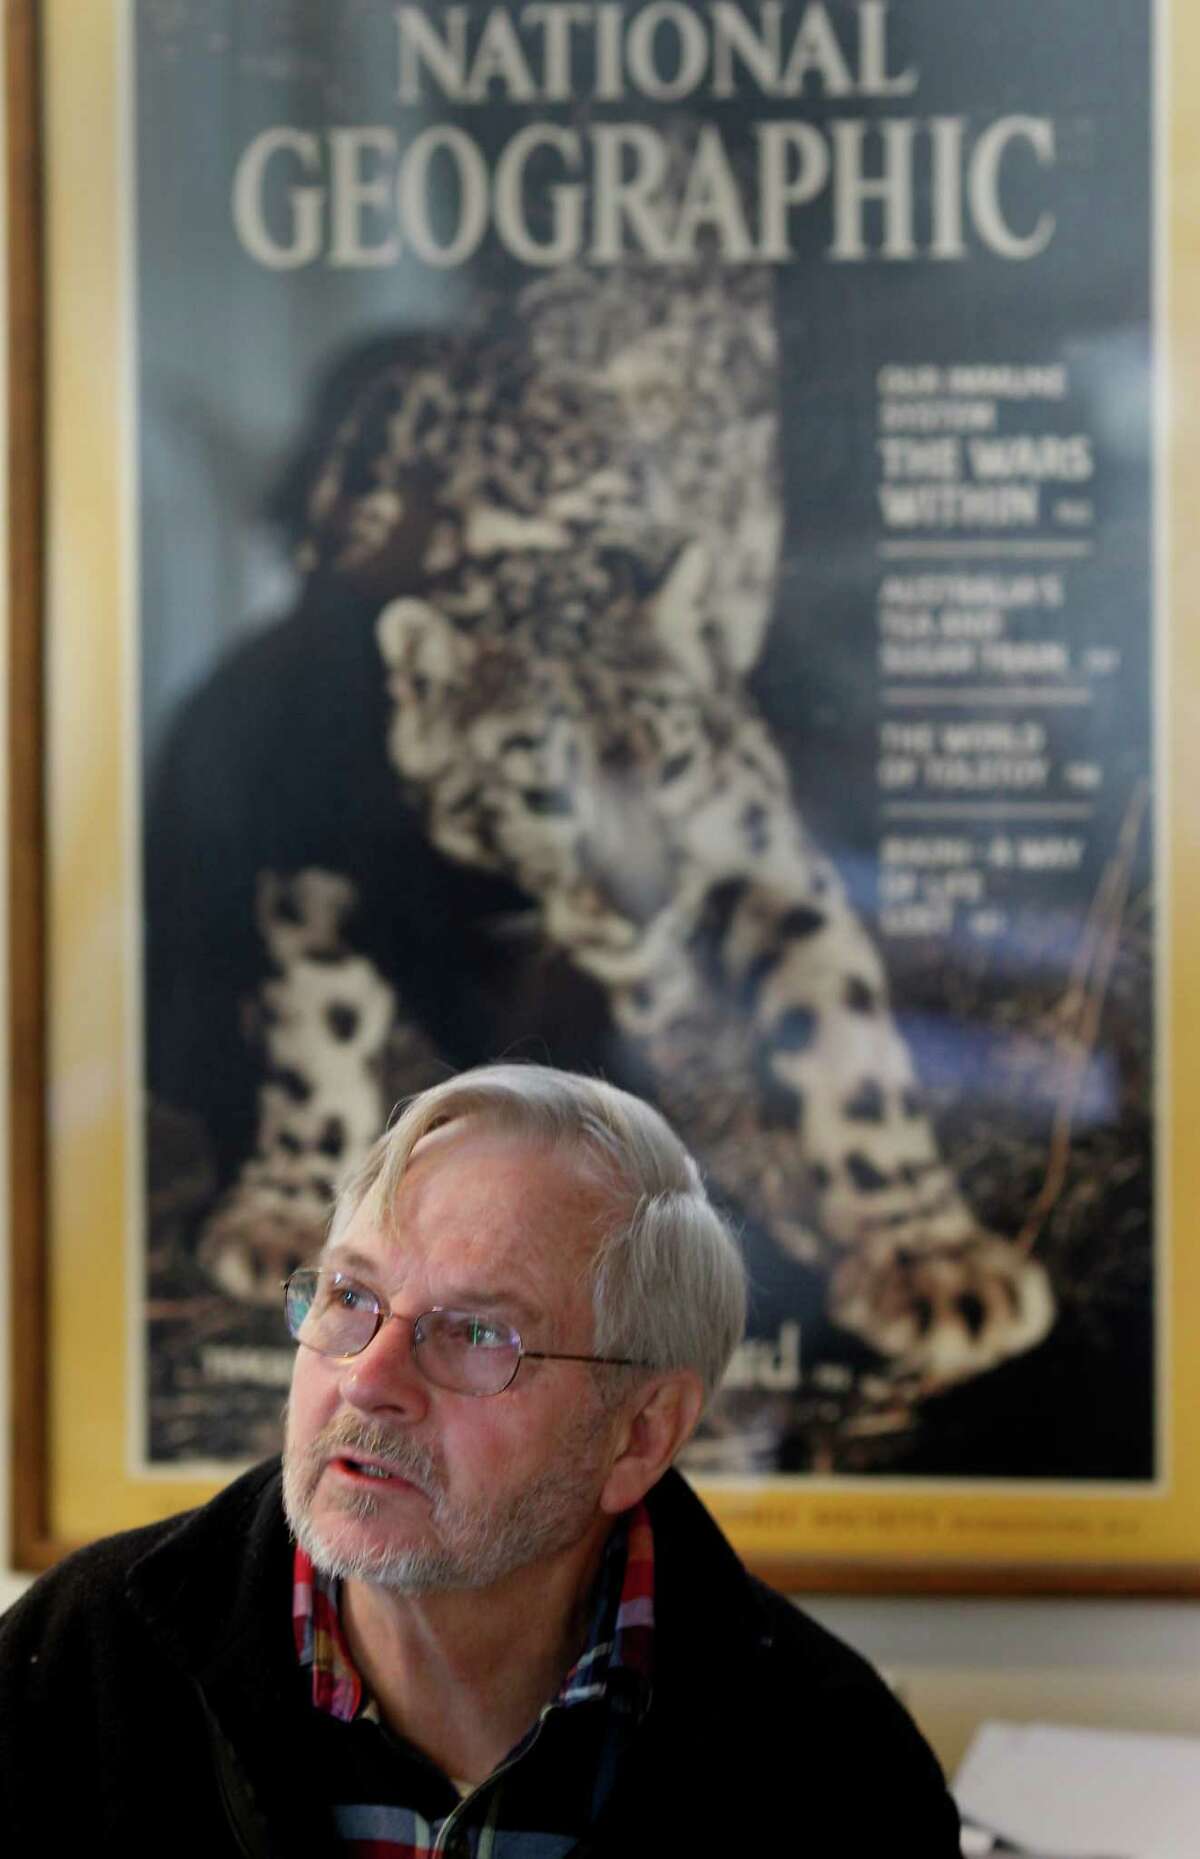 Rodney Jackson in his office with a large blowup of a 1986 National Geographic story with his photo of a snow leopard. Jackson, the world's foremost expert on snow leopards, uses remote camera traps to record the elusive cats in Asia. He uses the same technology near his Sonoma home to watch for mountain lions, bobcats, fox and other animals.